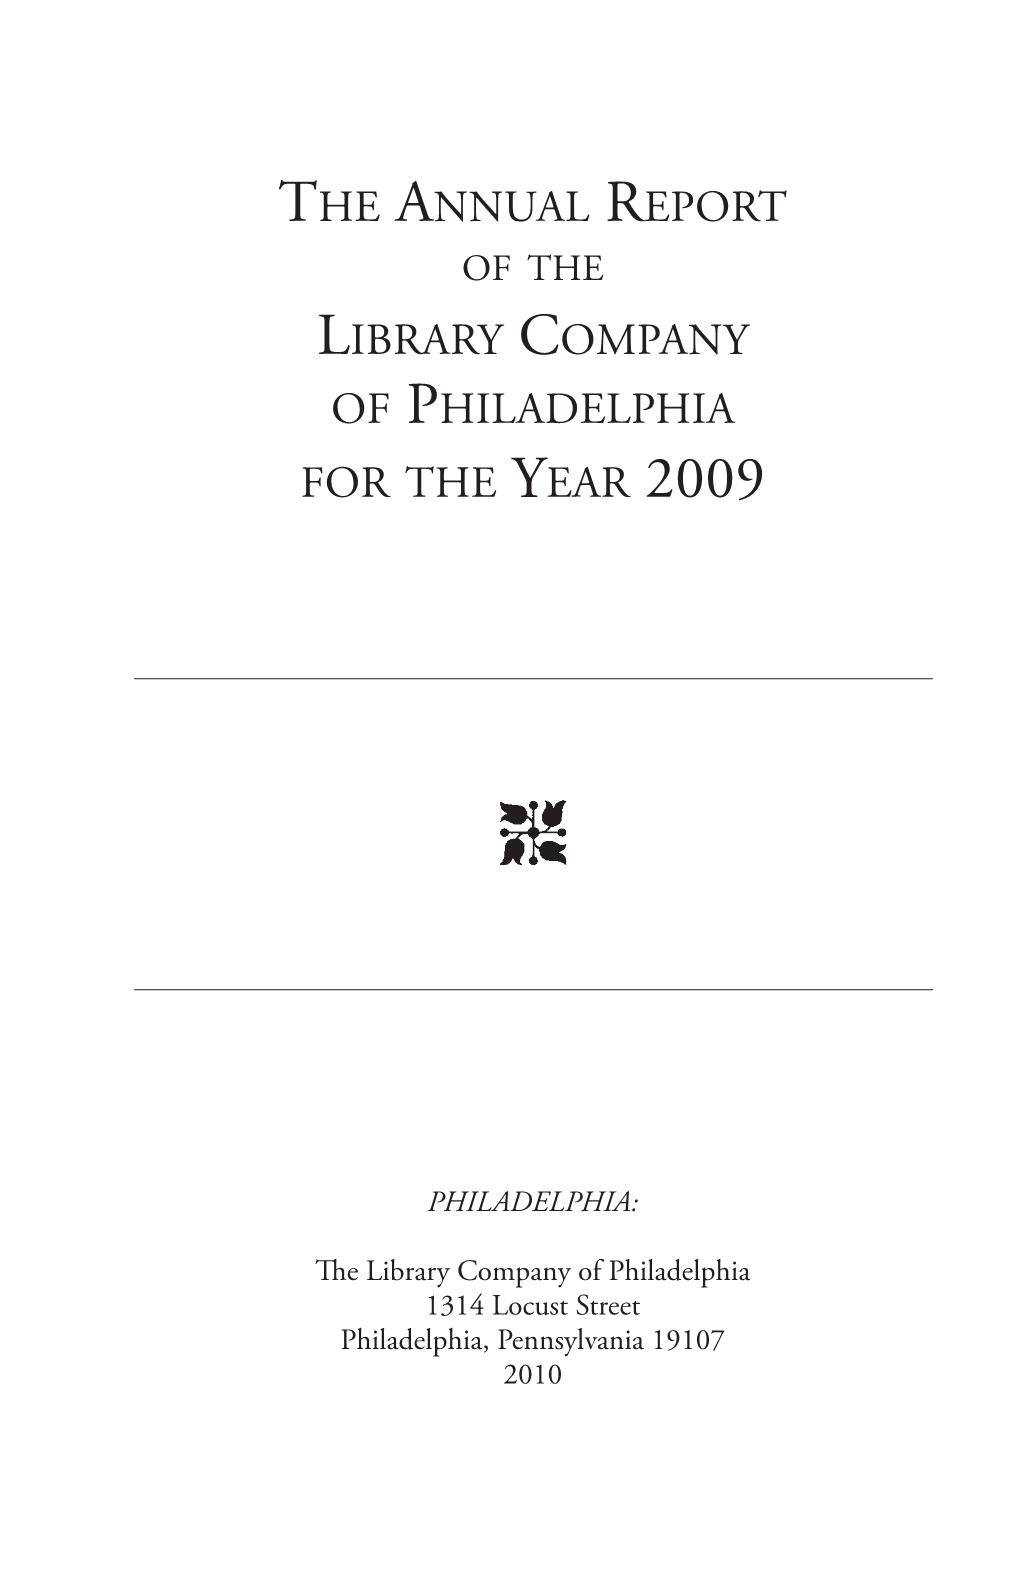 The Annual Report Library Company of Philadelphia